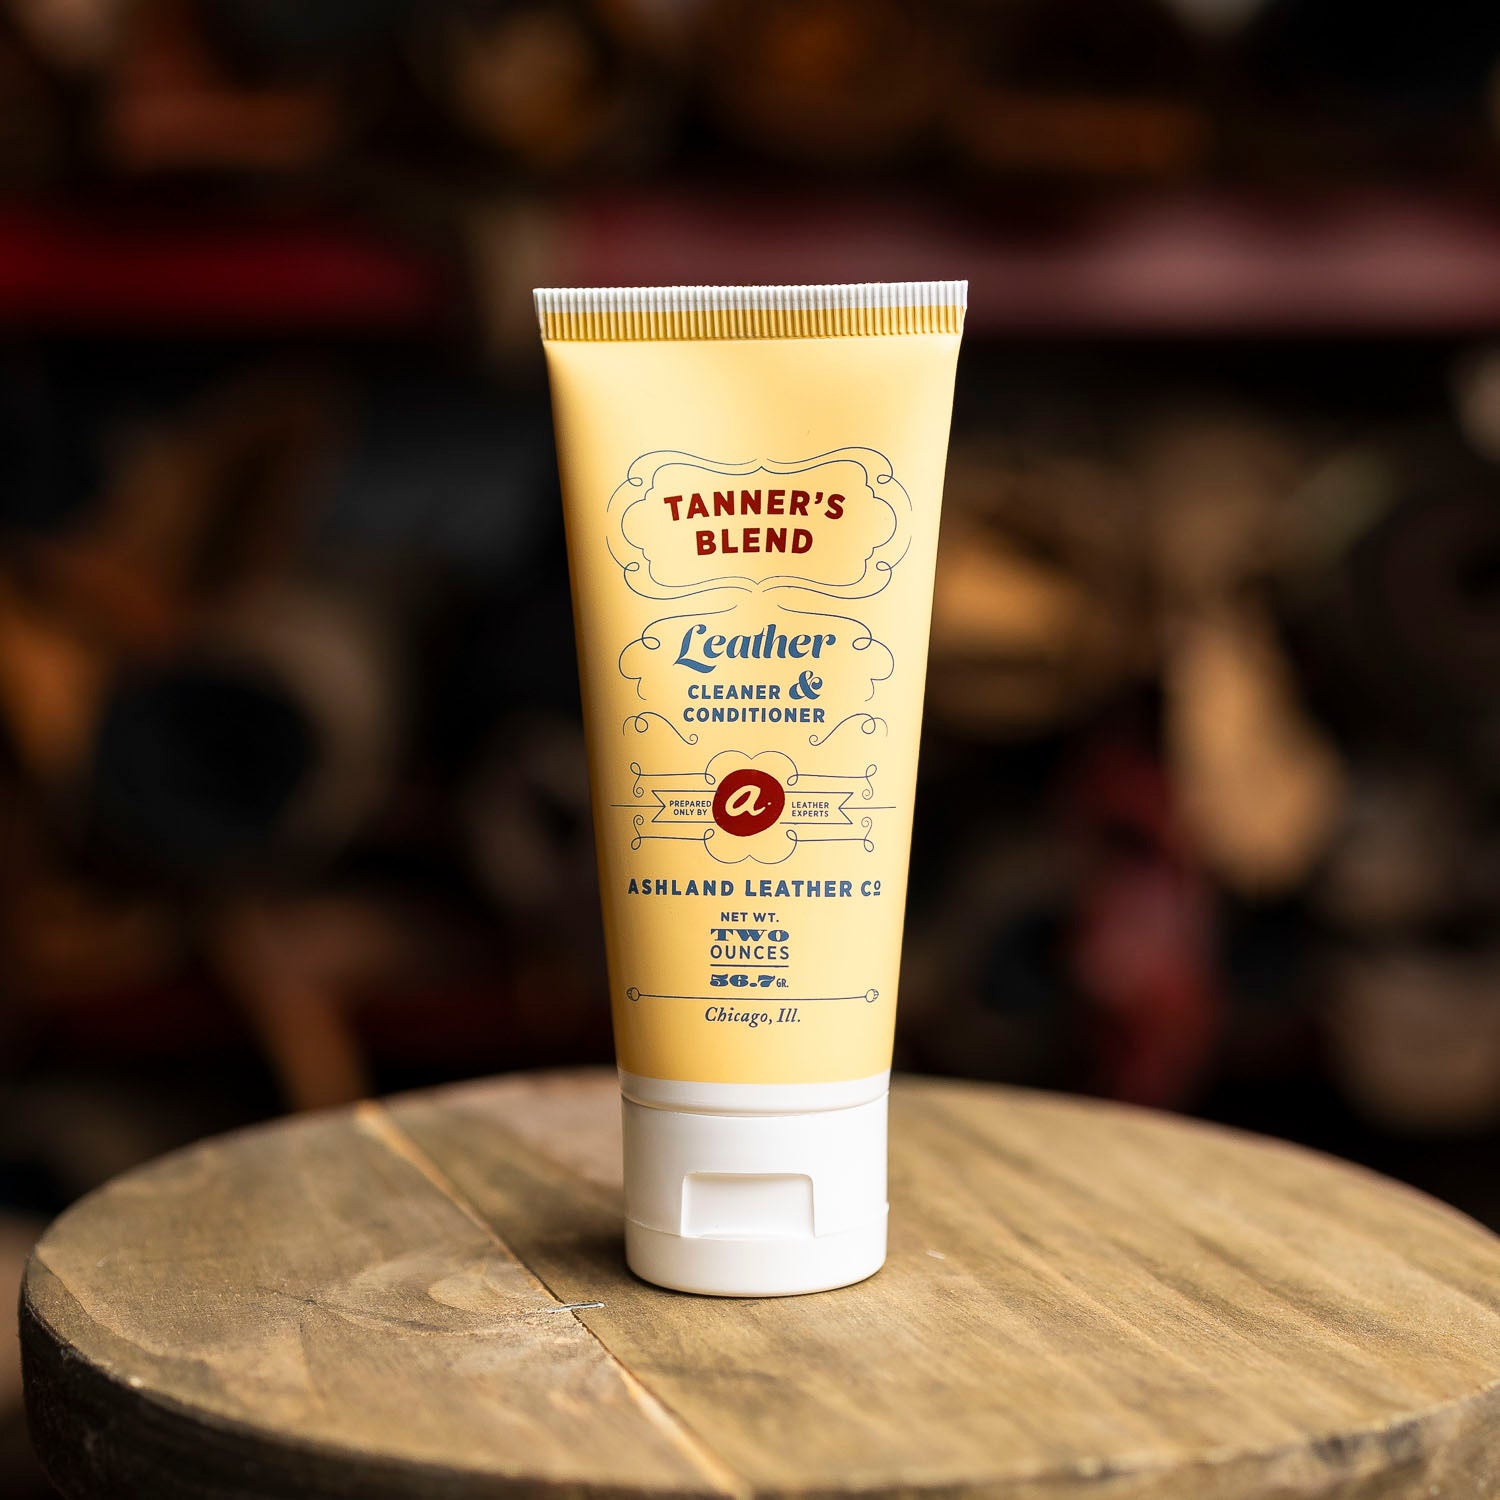 Ashland Leather Co. | Tanner's Blend Leather Conditioner 2 oz.